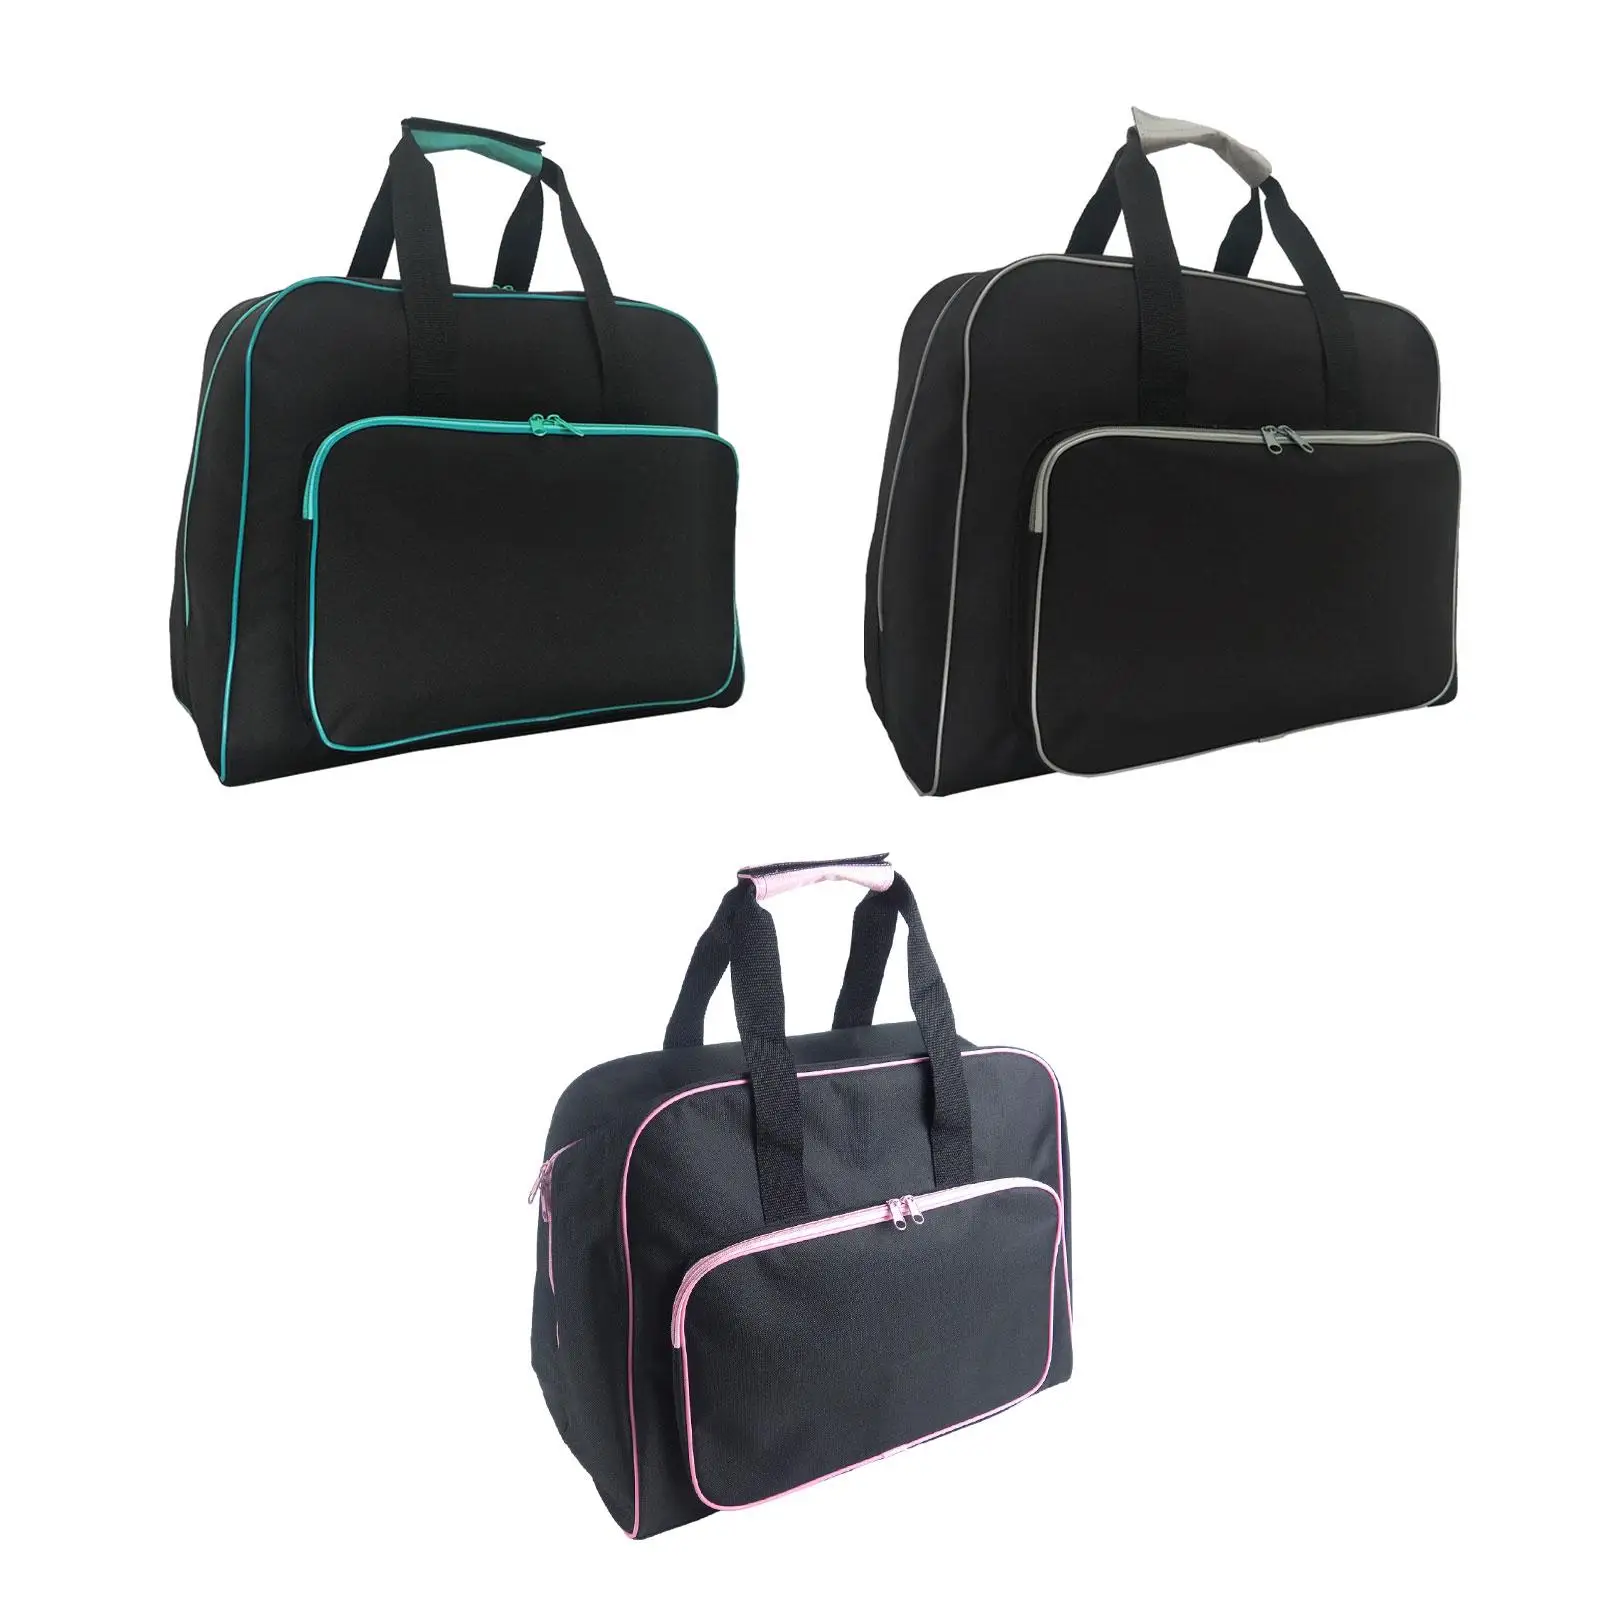 Travel Duffle Bag Clothing with Handle Multifunction Adults Large Capacity Gym Duffle Bag for Fitness Outdoor Yoga Travel Gym